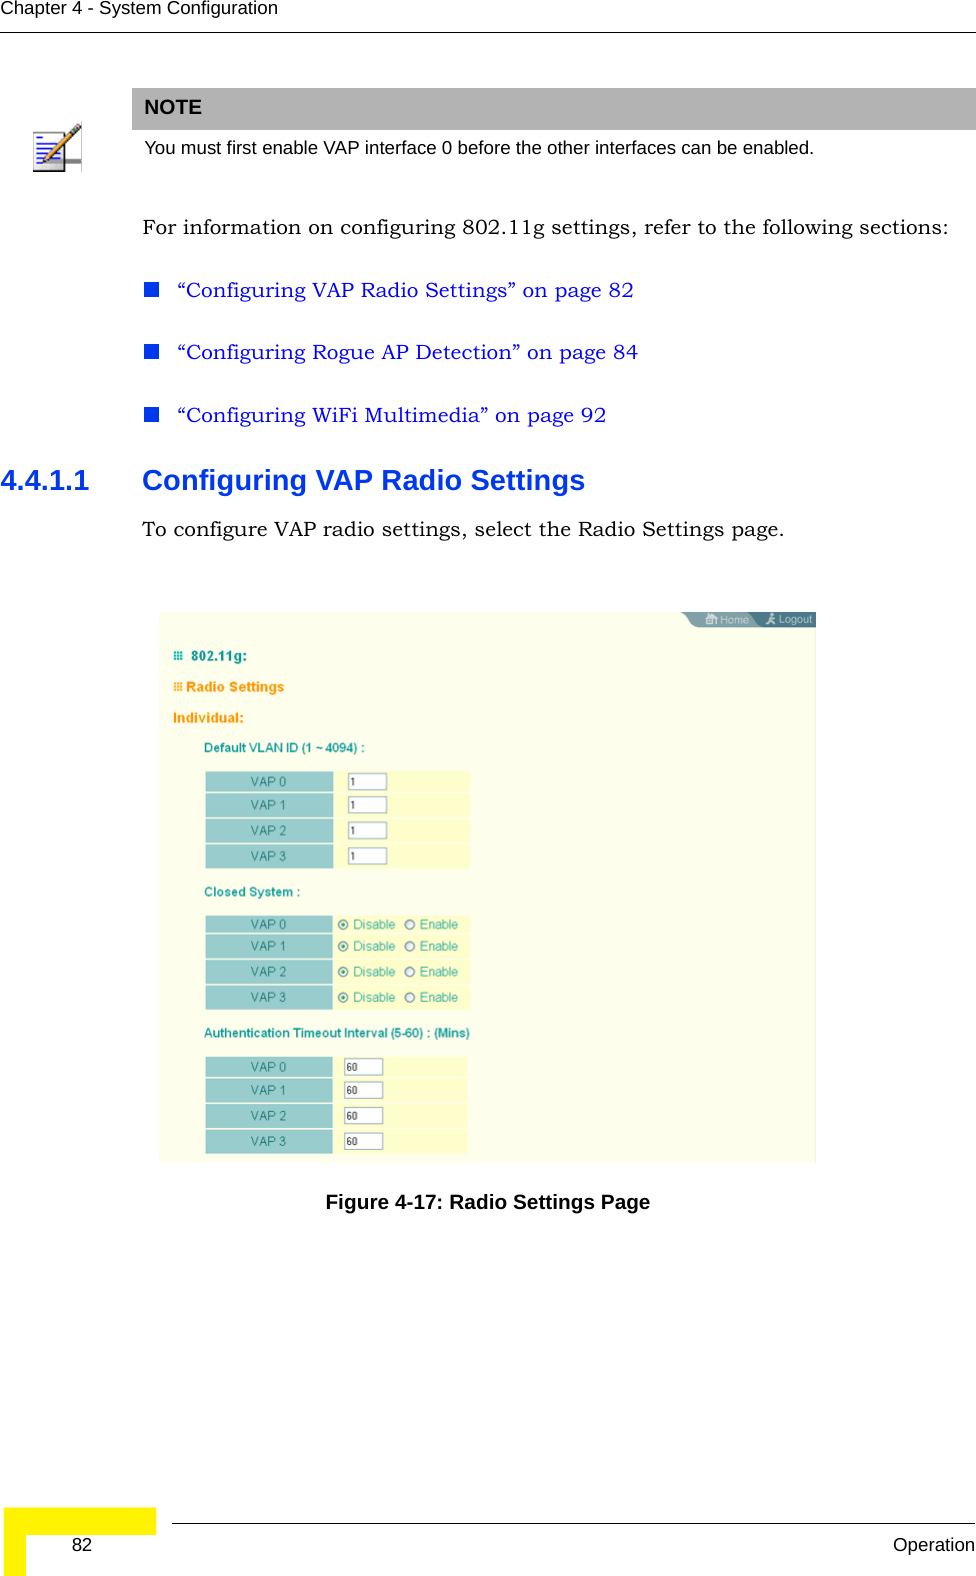  82 OperationChapter 4 - System ConfigurationFor information on configuring 802.11g settings, refer to the following sections:“Configuring VAP Radio Settings” on page 82“Configuring Rogue AP Detection” on page 84“Configuring WiFi Multimedia” on page 924.4.1.1 Configuring VAP Radio SettingsTo configure VAP radio settings, select the Radio Settings page.NOTEYou must first enable VAP interface 0 before the other interfaces can be enabled.Figure 4-17: Radio Settings Page